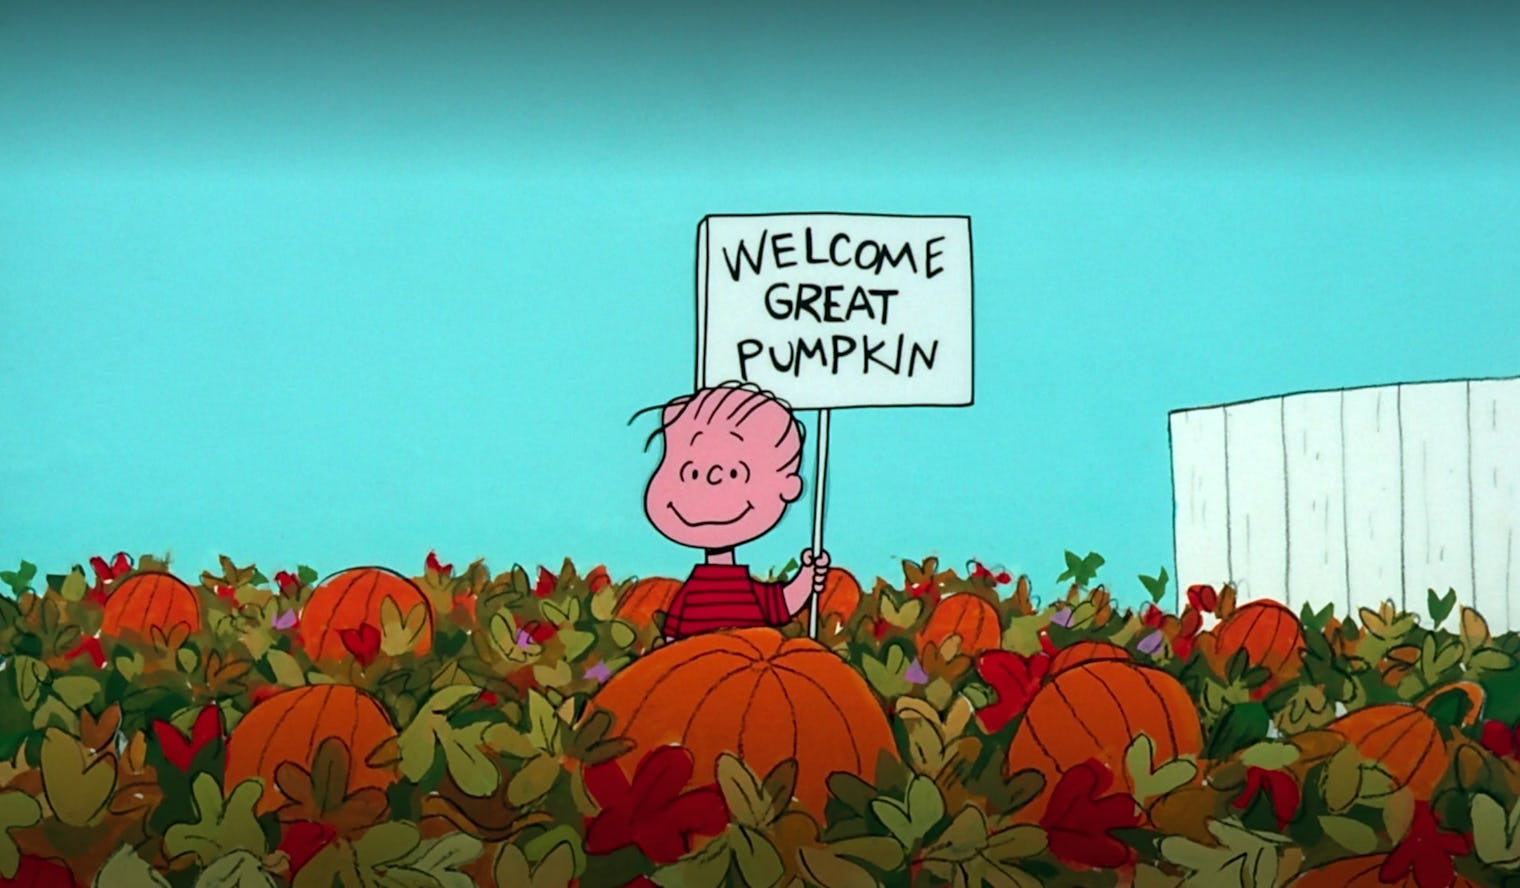 How To Watch 'It's the Great Pumpkin, Charlie Brown' In 2022